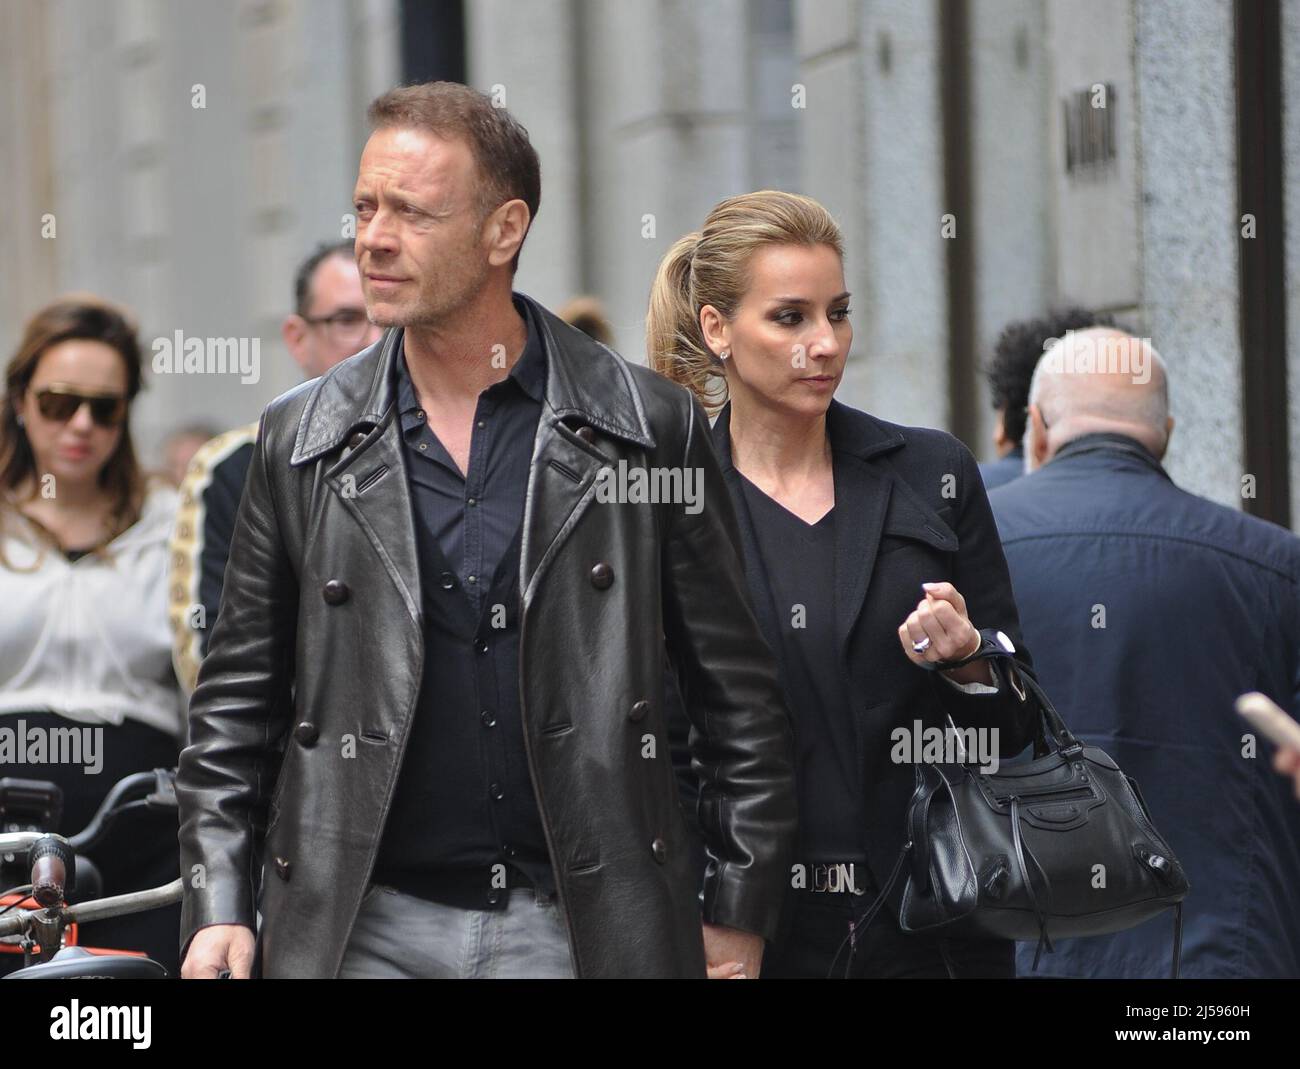 Milan 21st Apr 2022 Milan 21 04 2022 Rocco Siffredi After Having Lunch With His Wife Rosa